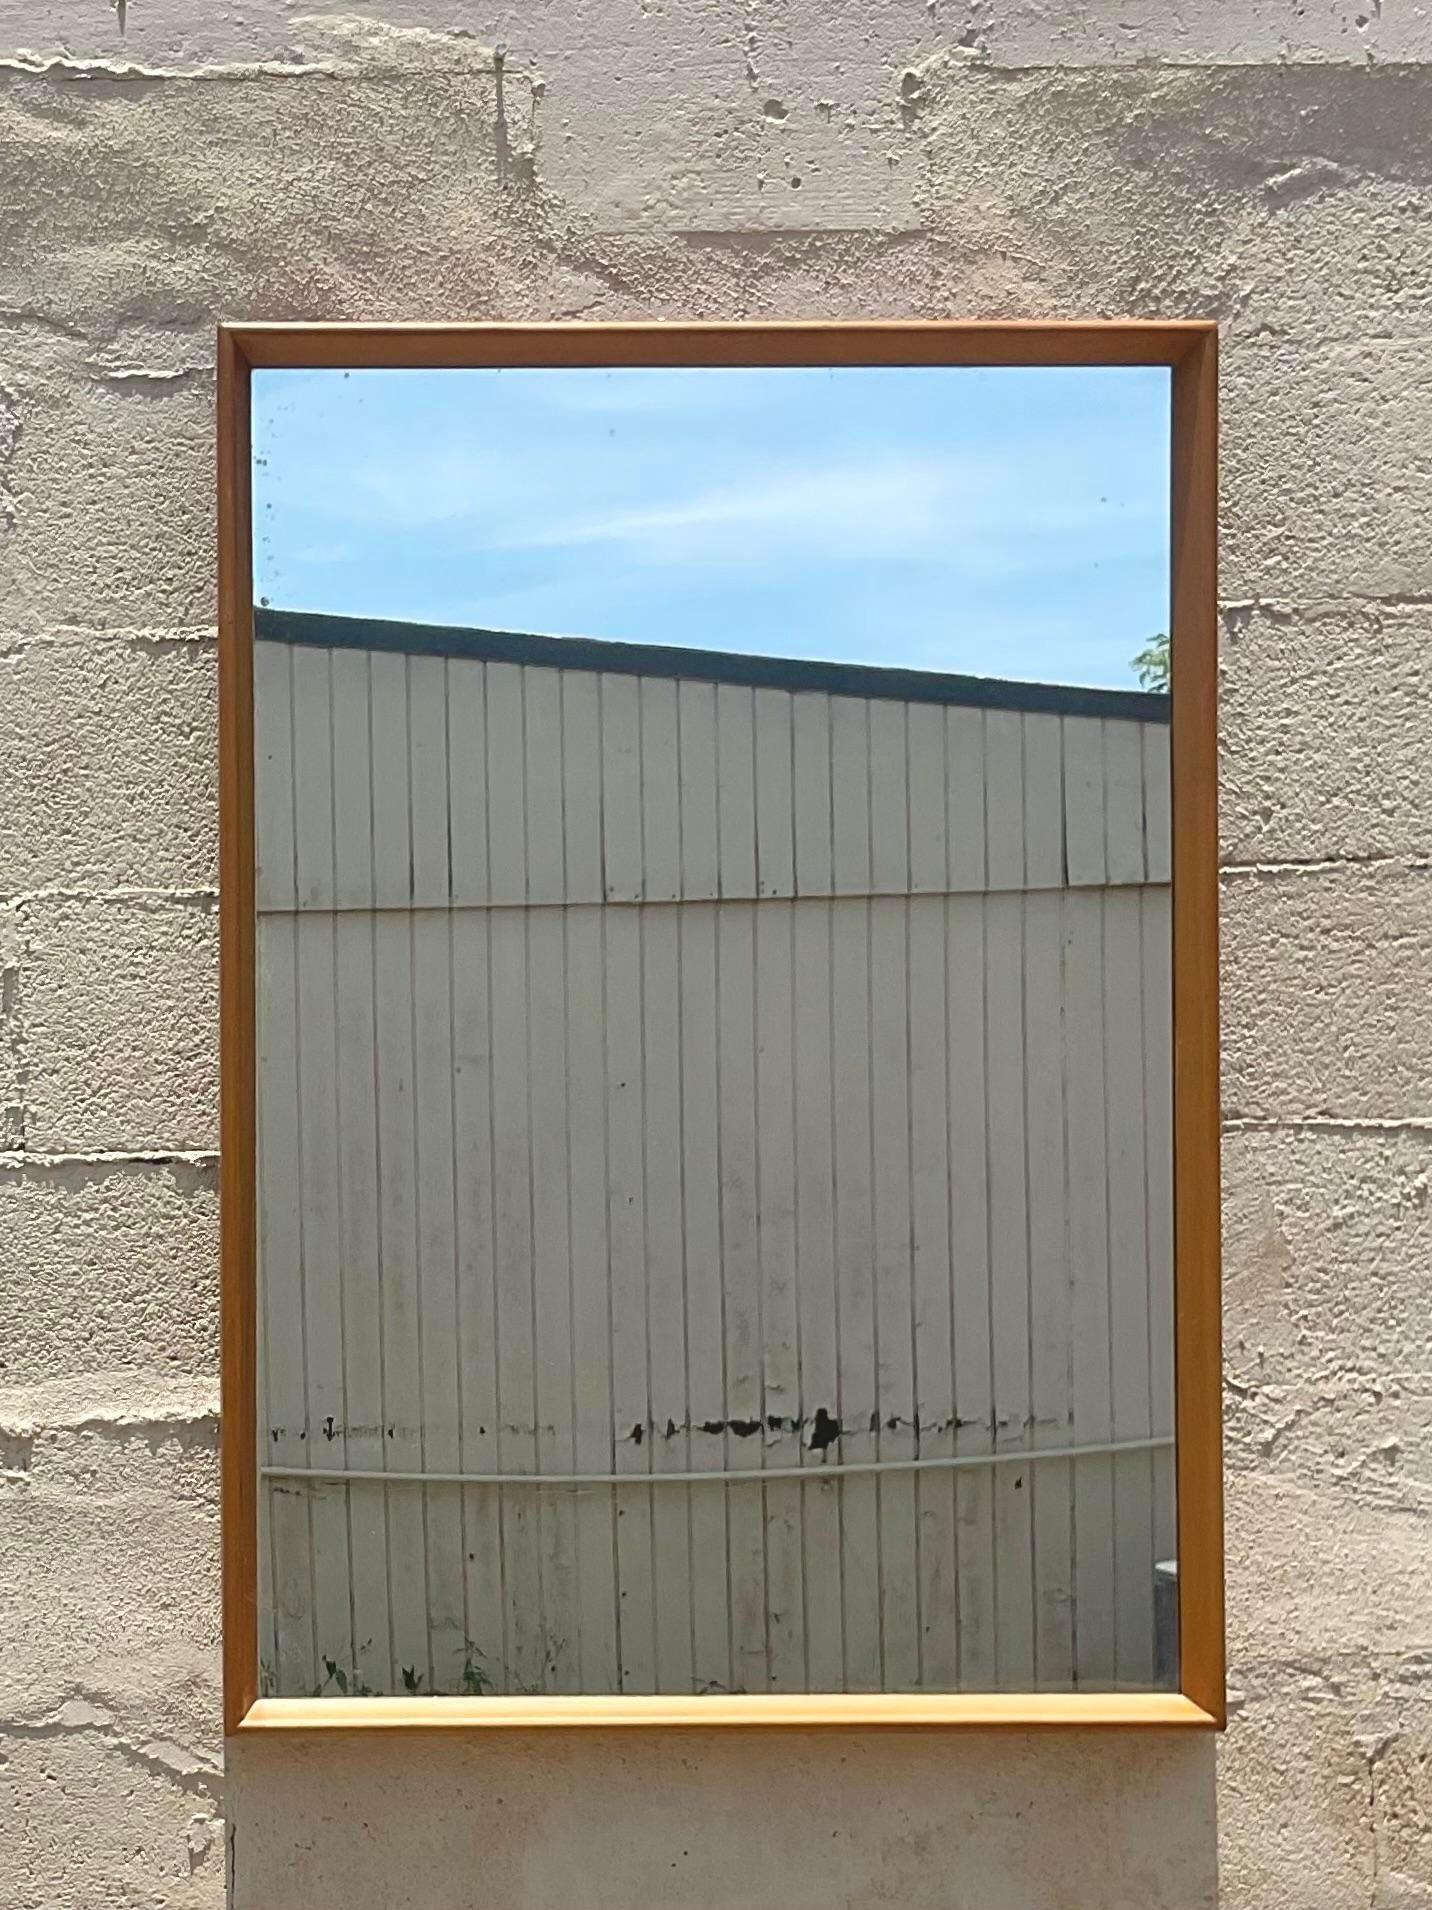 A fabulous vintage MCM wall mirror. Done in the manner of the iconic Heywood Wakefield group. A chic and simple design done in Maple wood. Acquired from a Palm Beach estate.